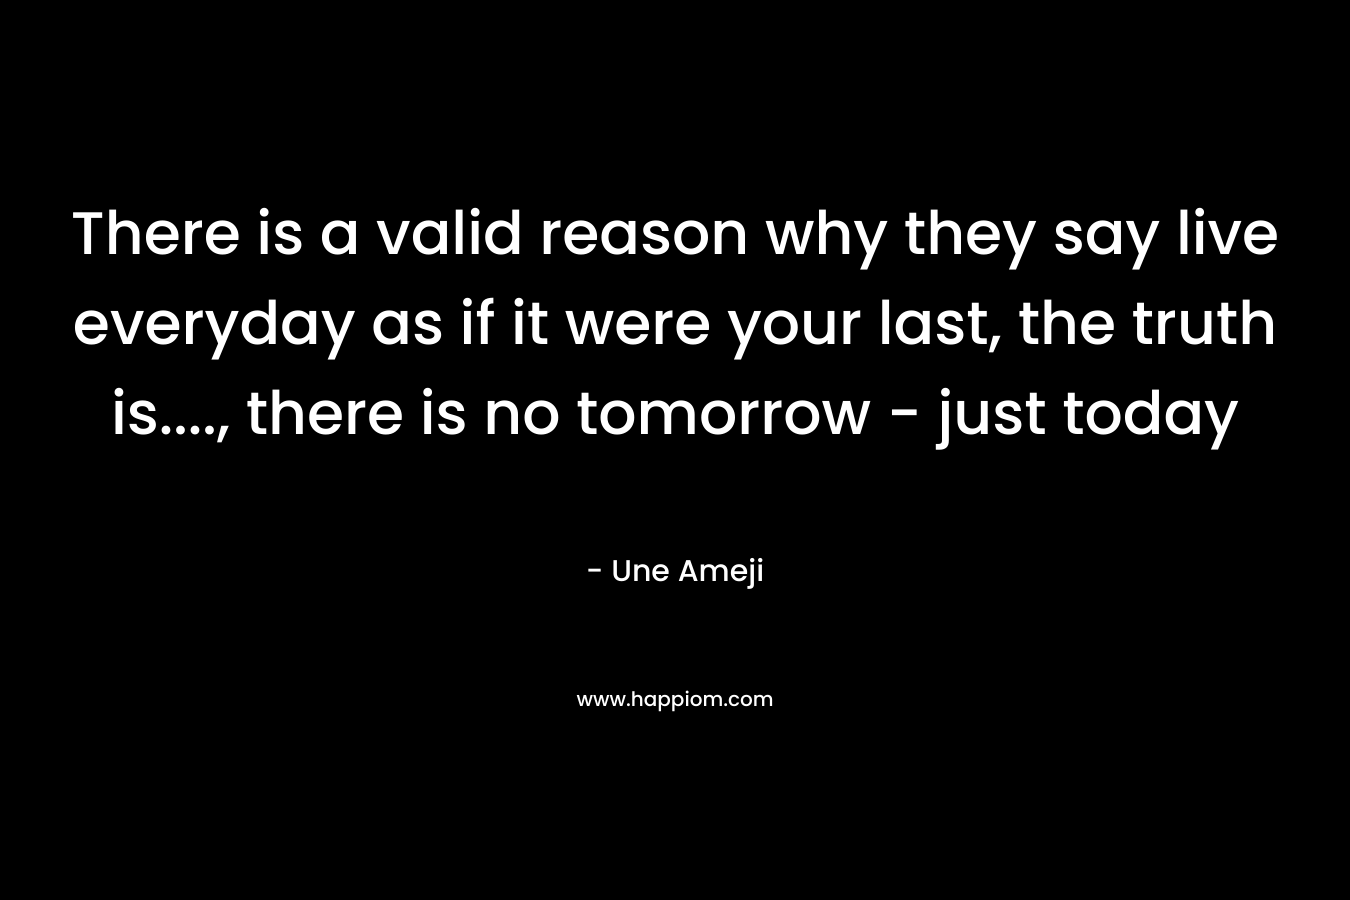 There is a valid reason why they say live everyday as if it were your last, the truth is...., there is no tomorrow - just today